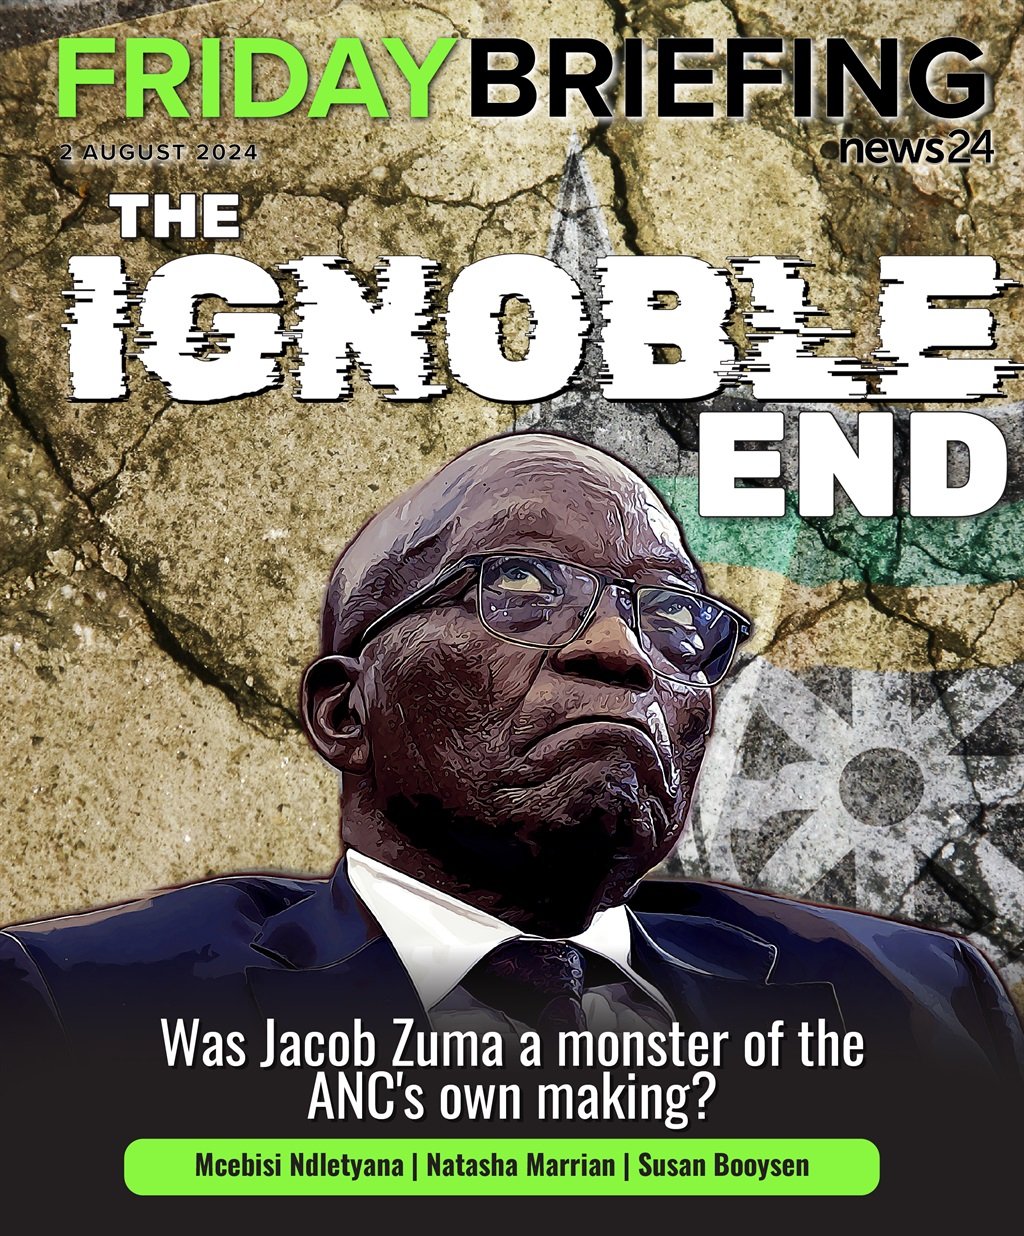 News24 | FRIDAY BRIEFING | Jacob Zuma's ignoble end after six decades with the ANC